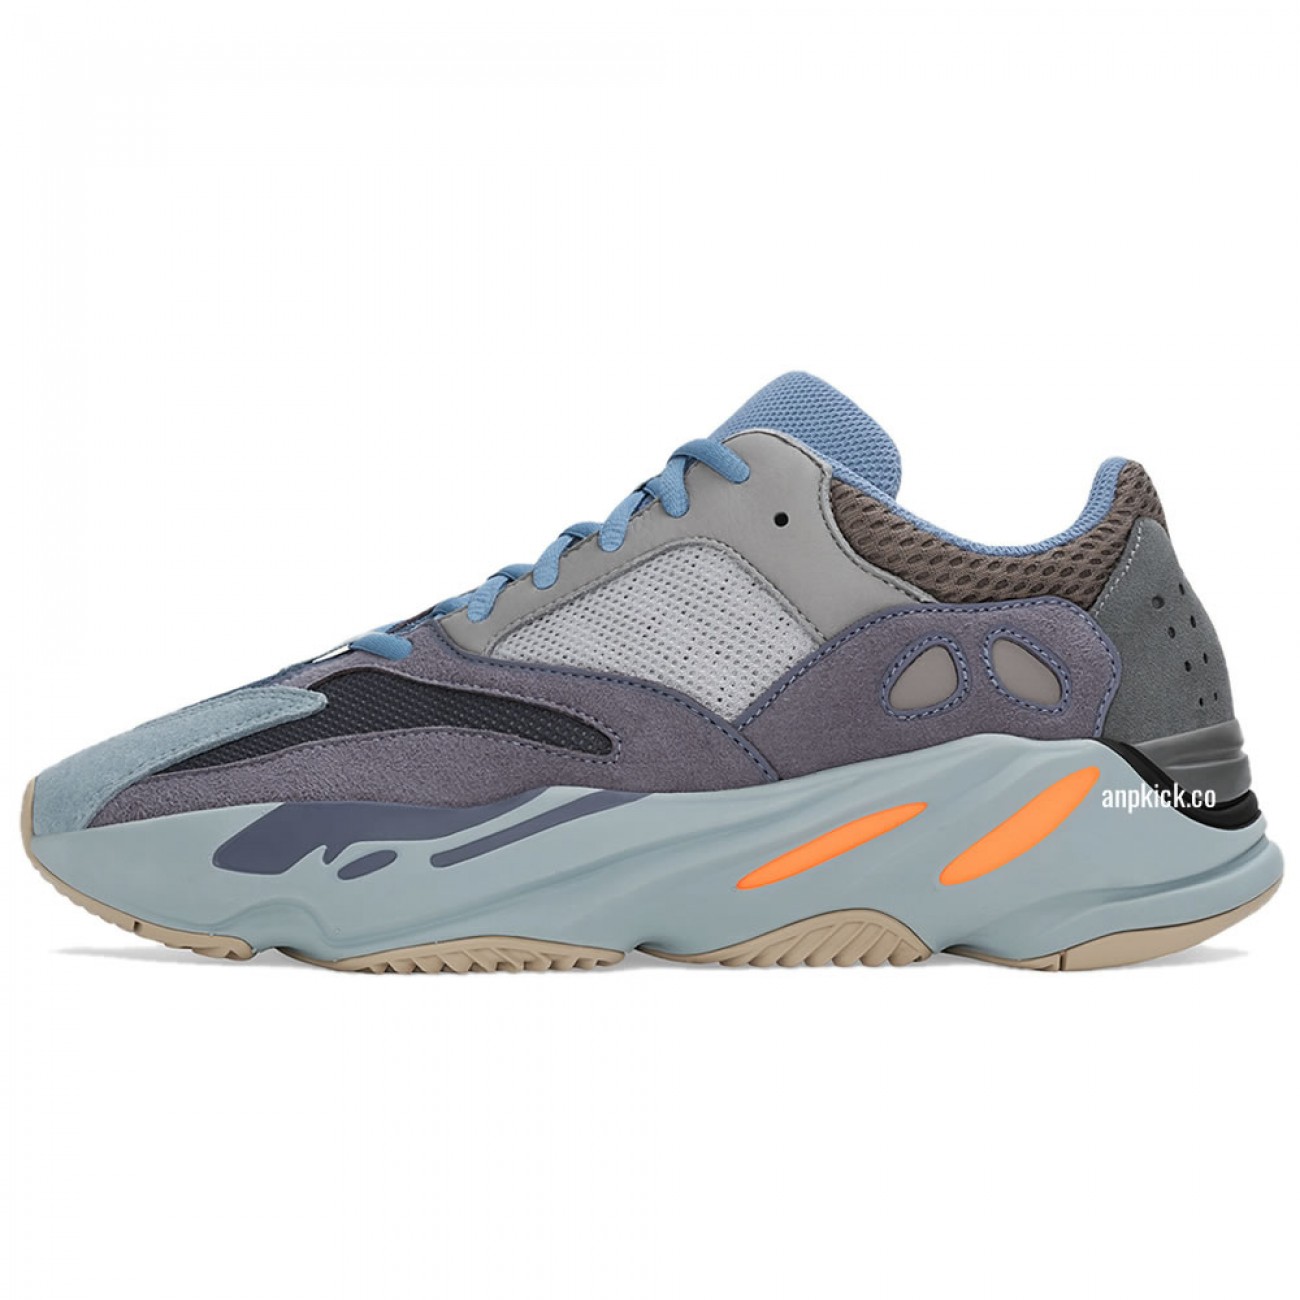 adidas Yeezy Boost 700 "Carbon Blue" Release Date FW2498